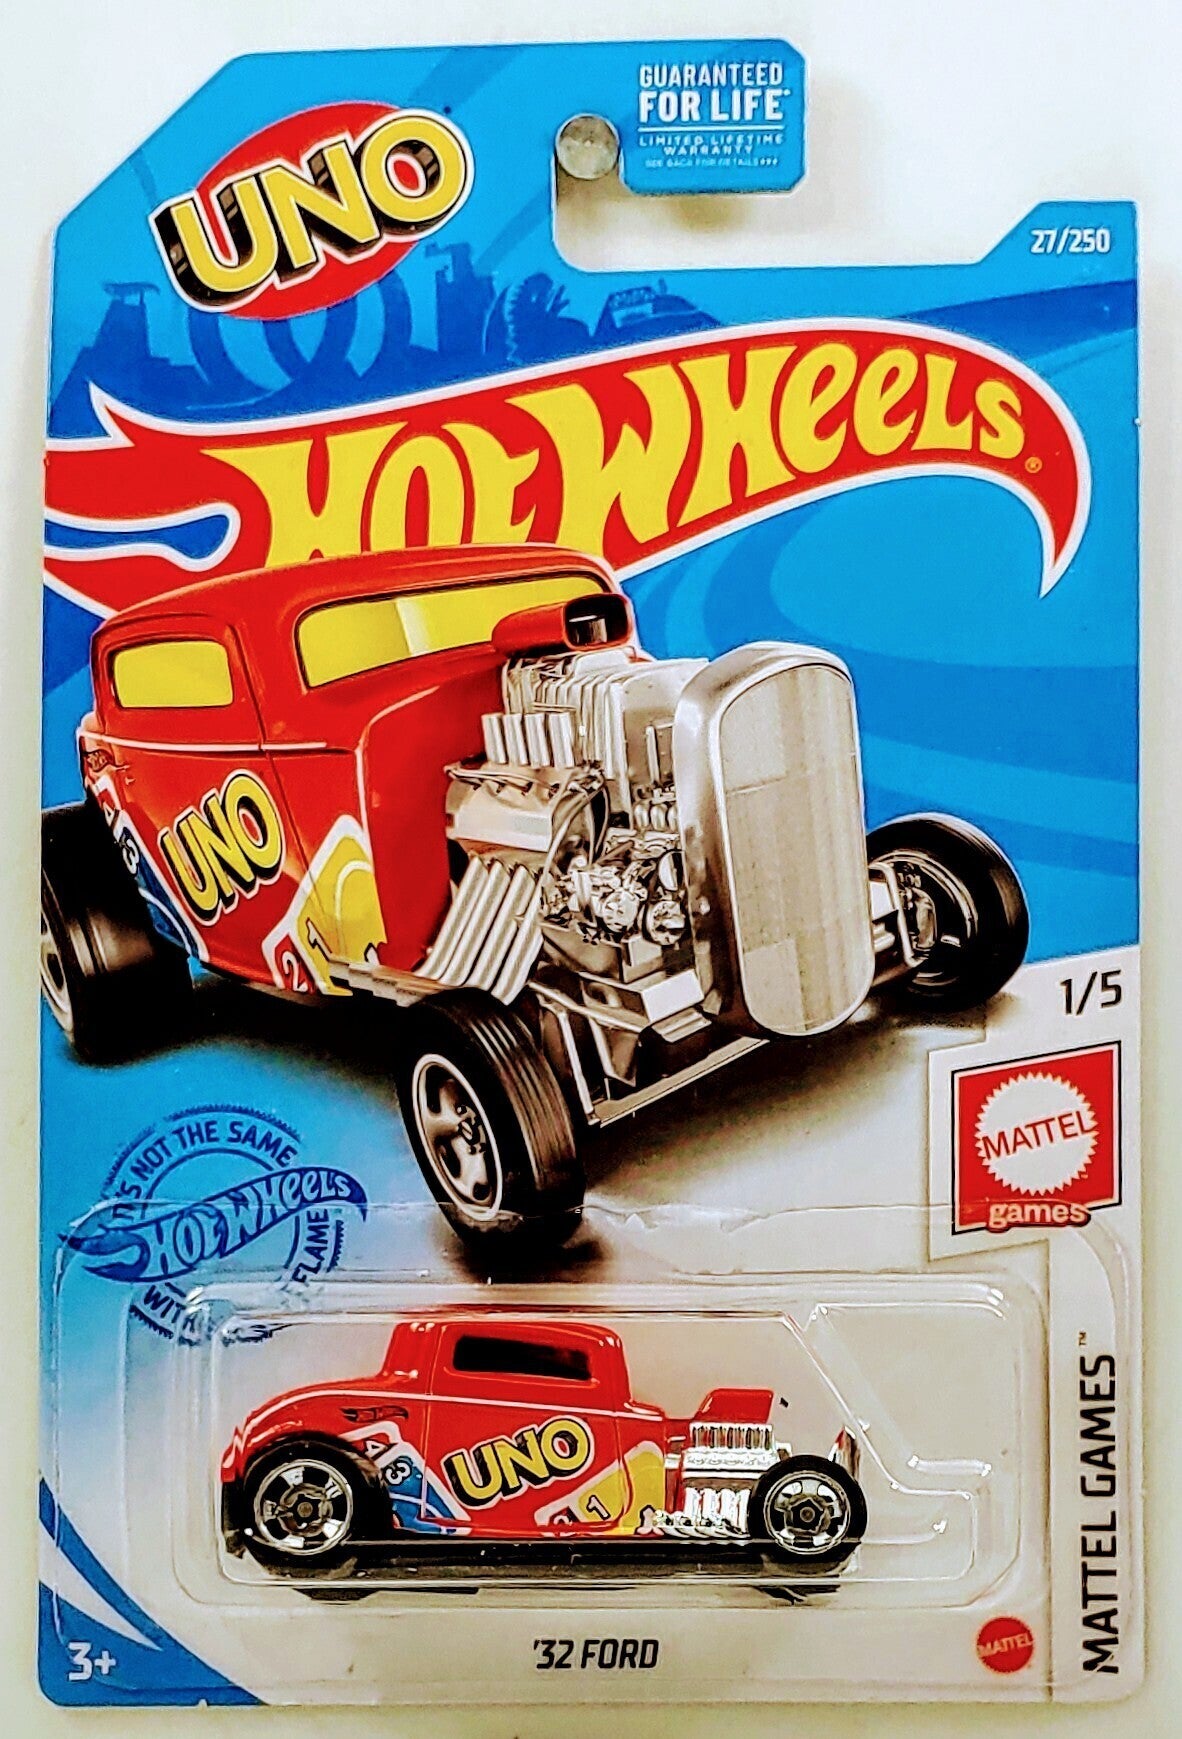 Hot Wheels 2021 - Collector # 027/250 - Mattel Games 1/5 - '32 Ford - Red / UNO